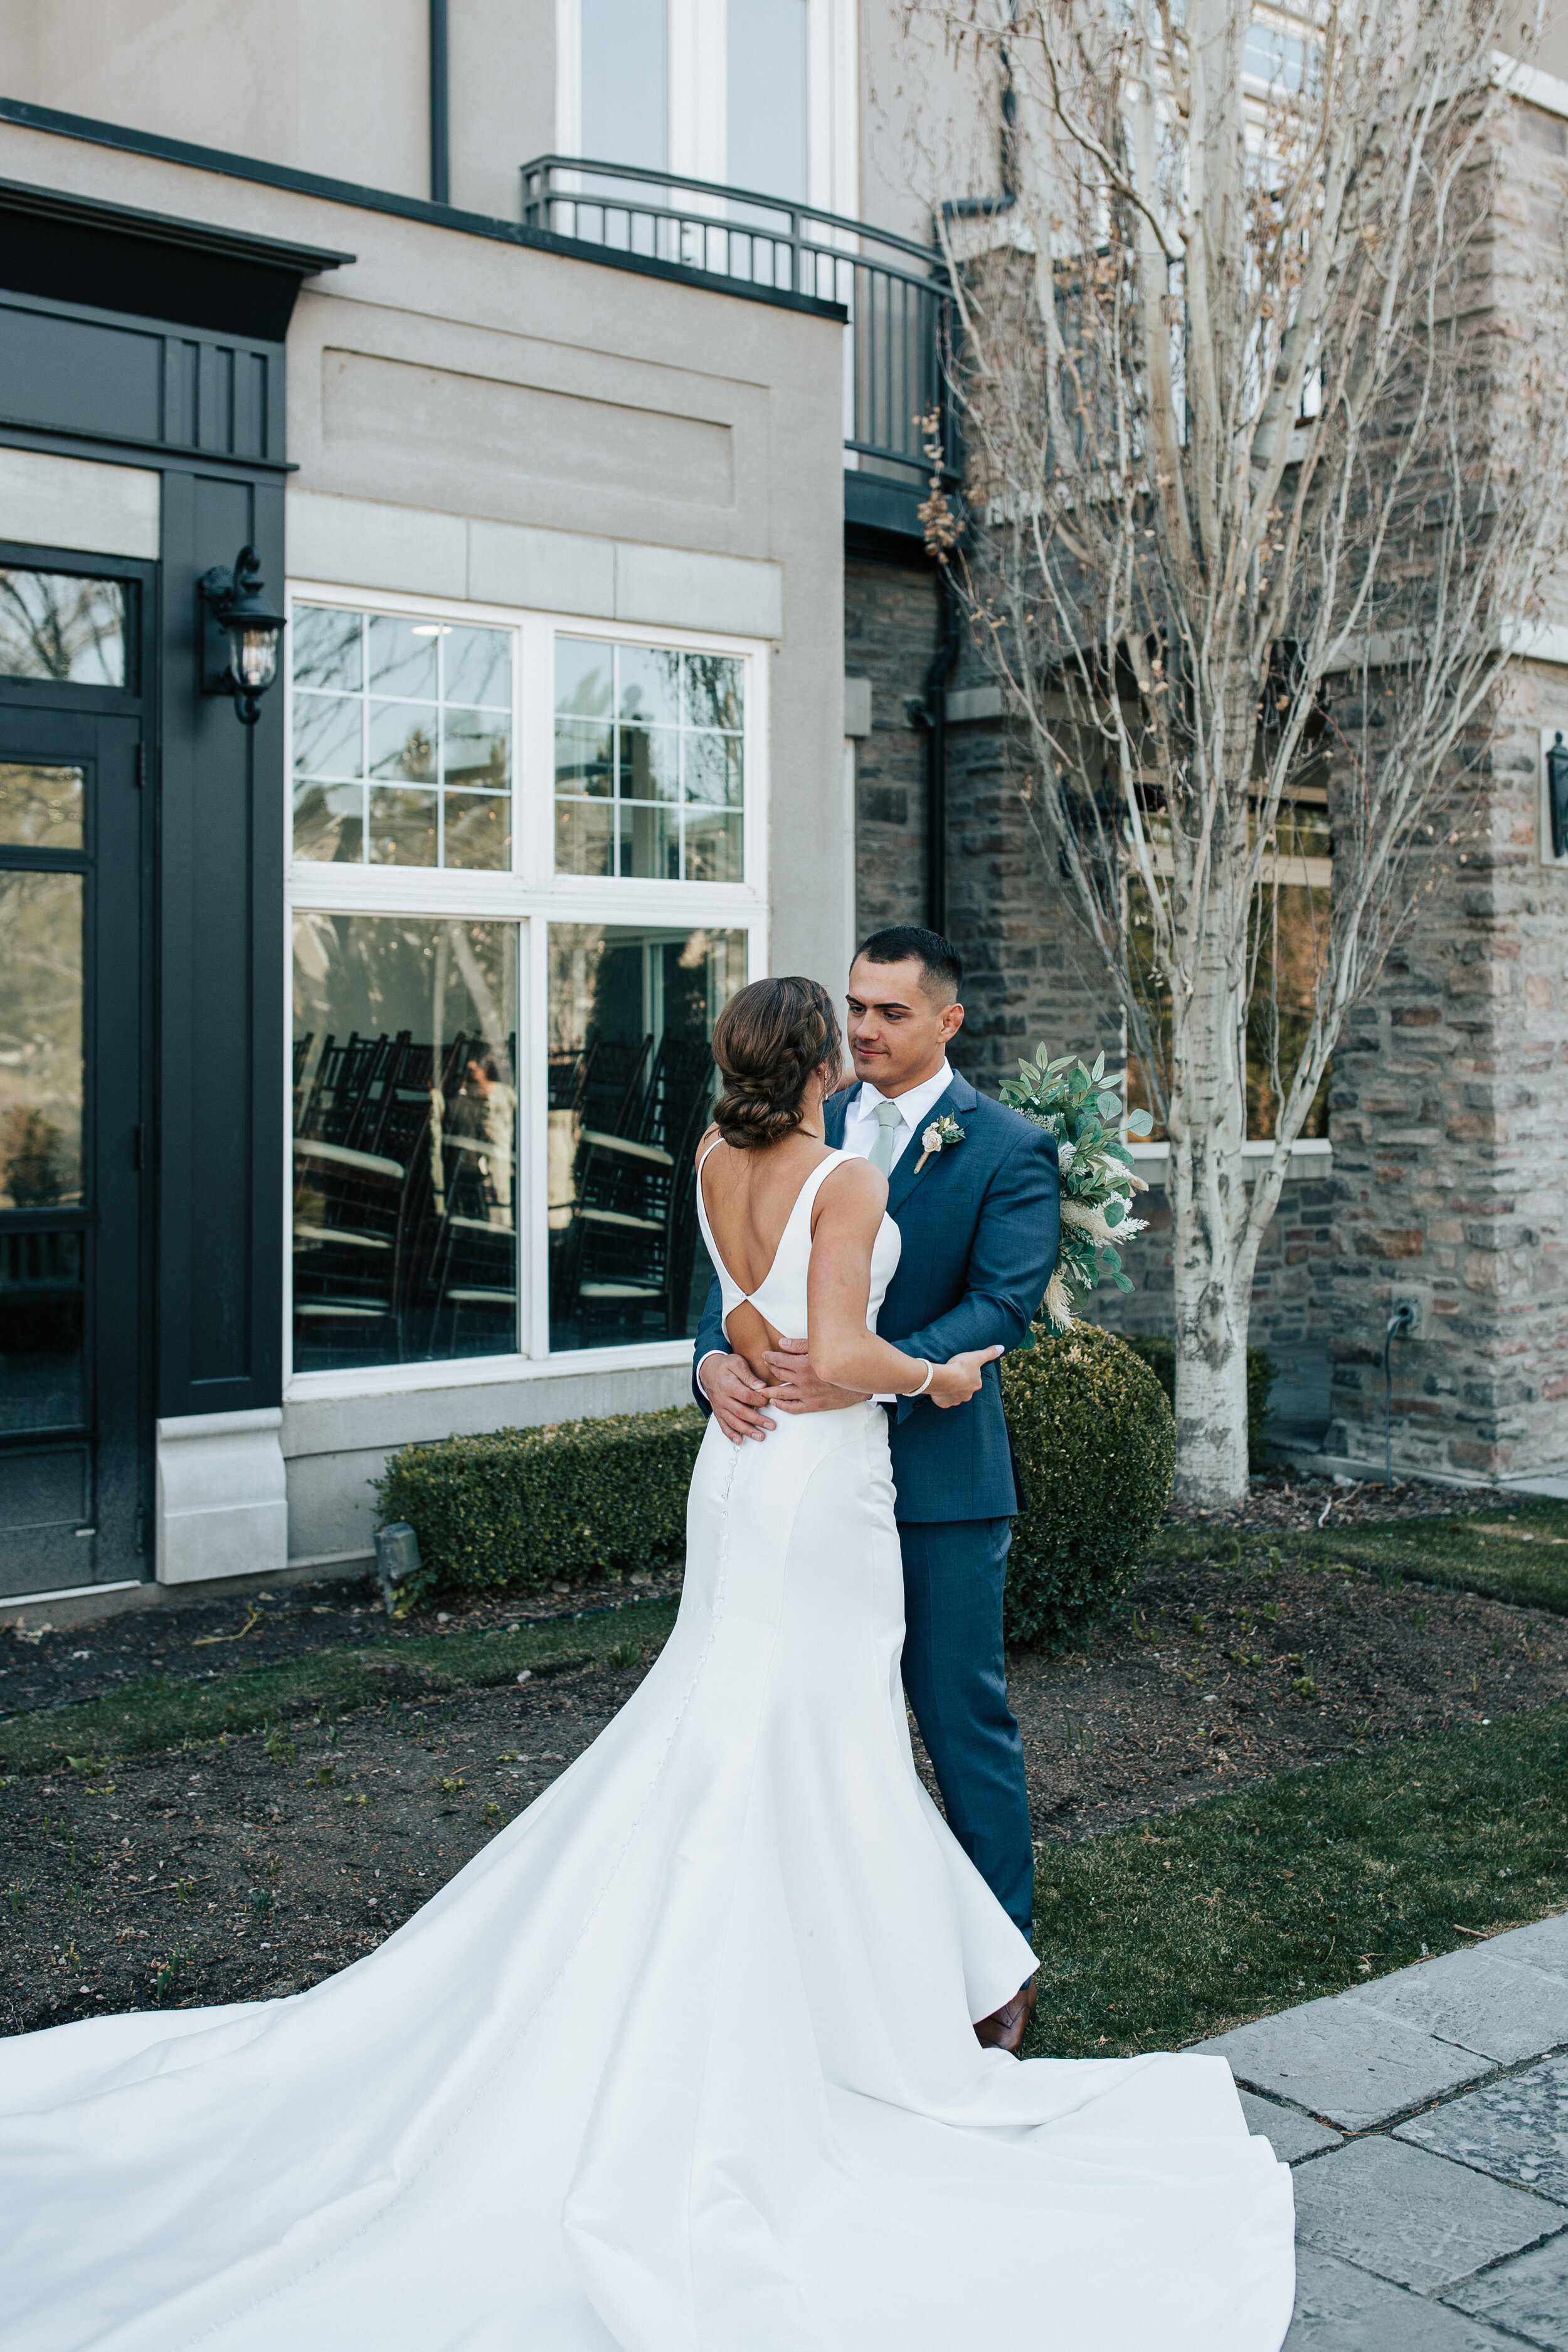  Outside of Sleepy Ridge Golf Course a groom wraps his arms around his bride and holds her tightly by Emily Jenkins Photography. sleepy ridge weddings bride and groom bridal gown train fan #emilyjenkinsphotography #emilyjenkinsweddings #utahcounty #s